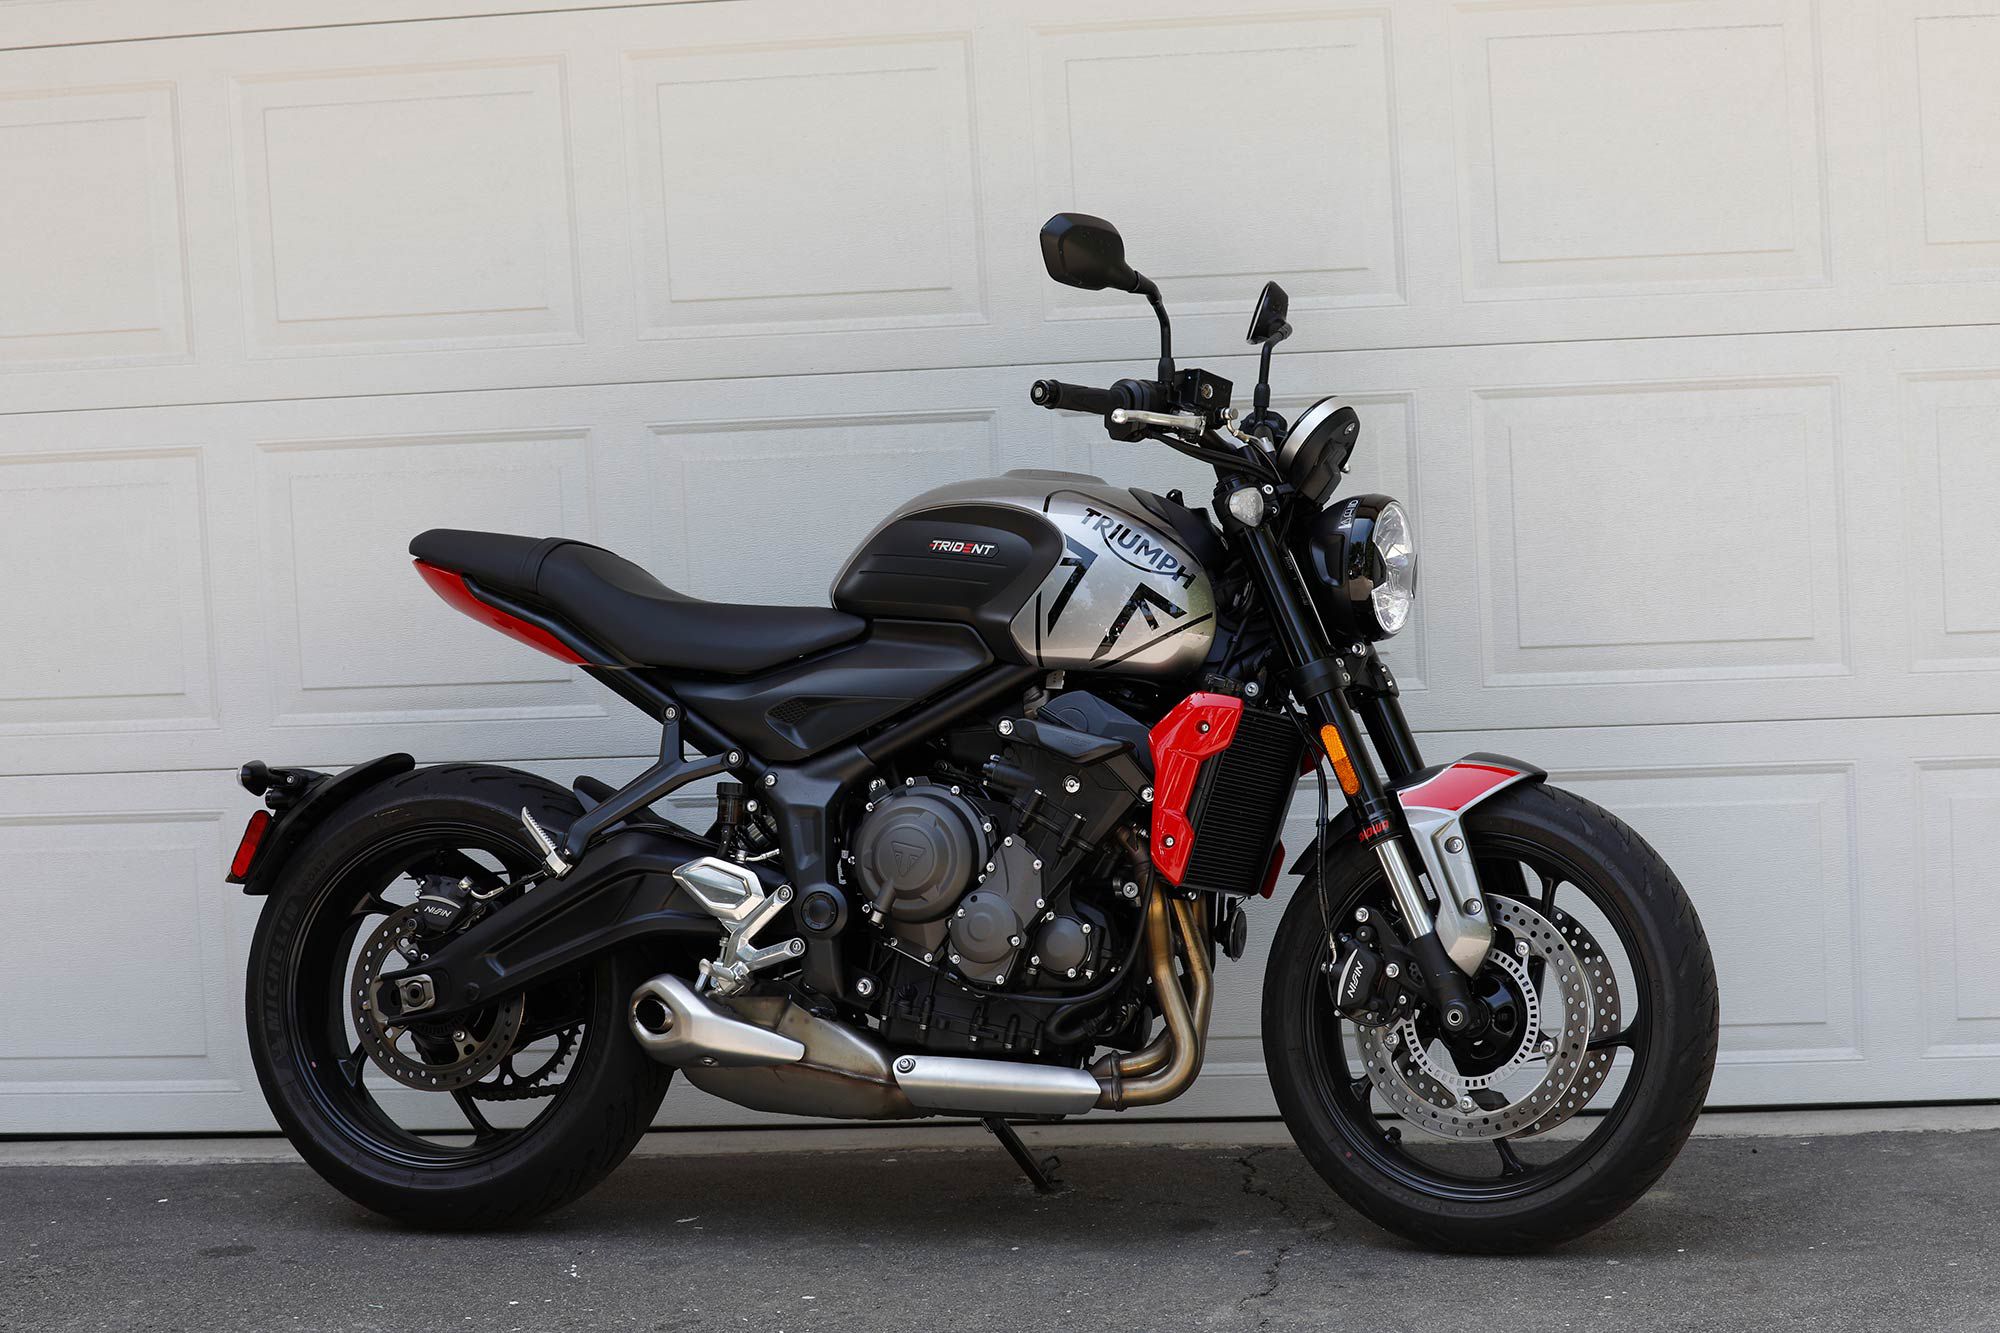 Triumph Motorcycles gets back to the basics with its gorgeous Trident 660 ($8,095 as tested).